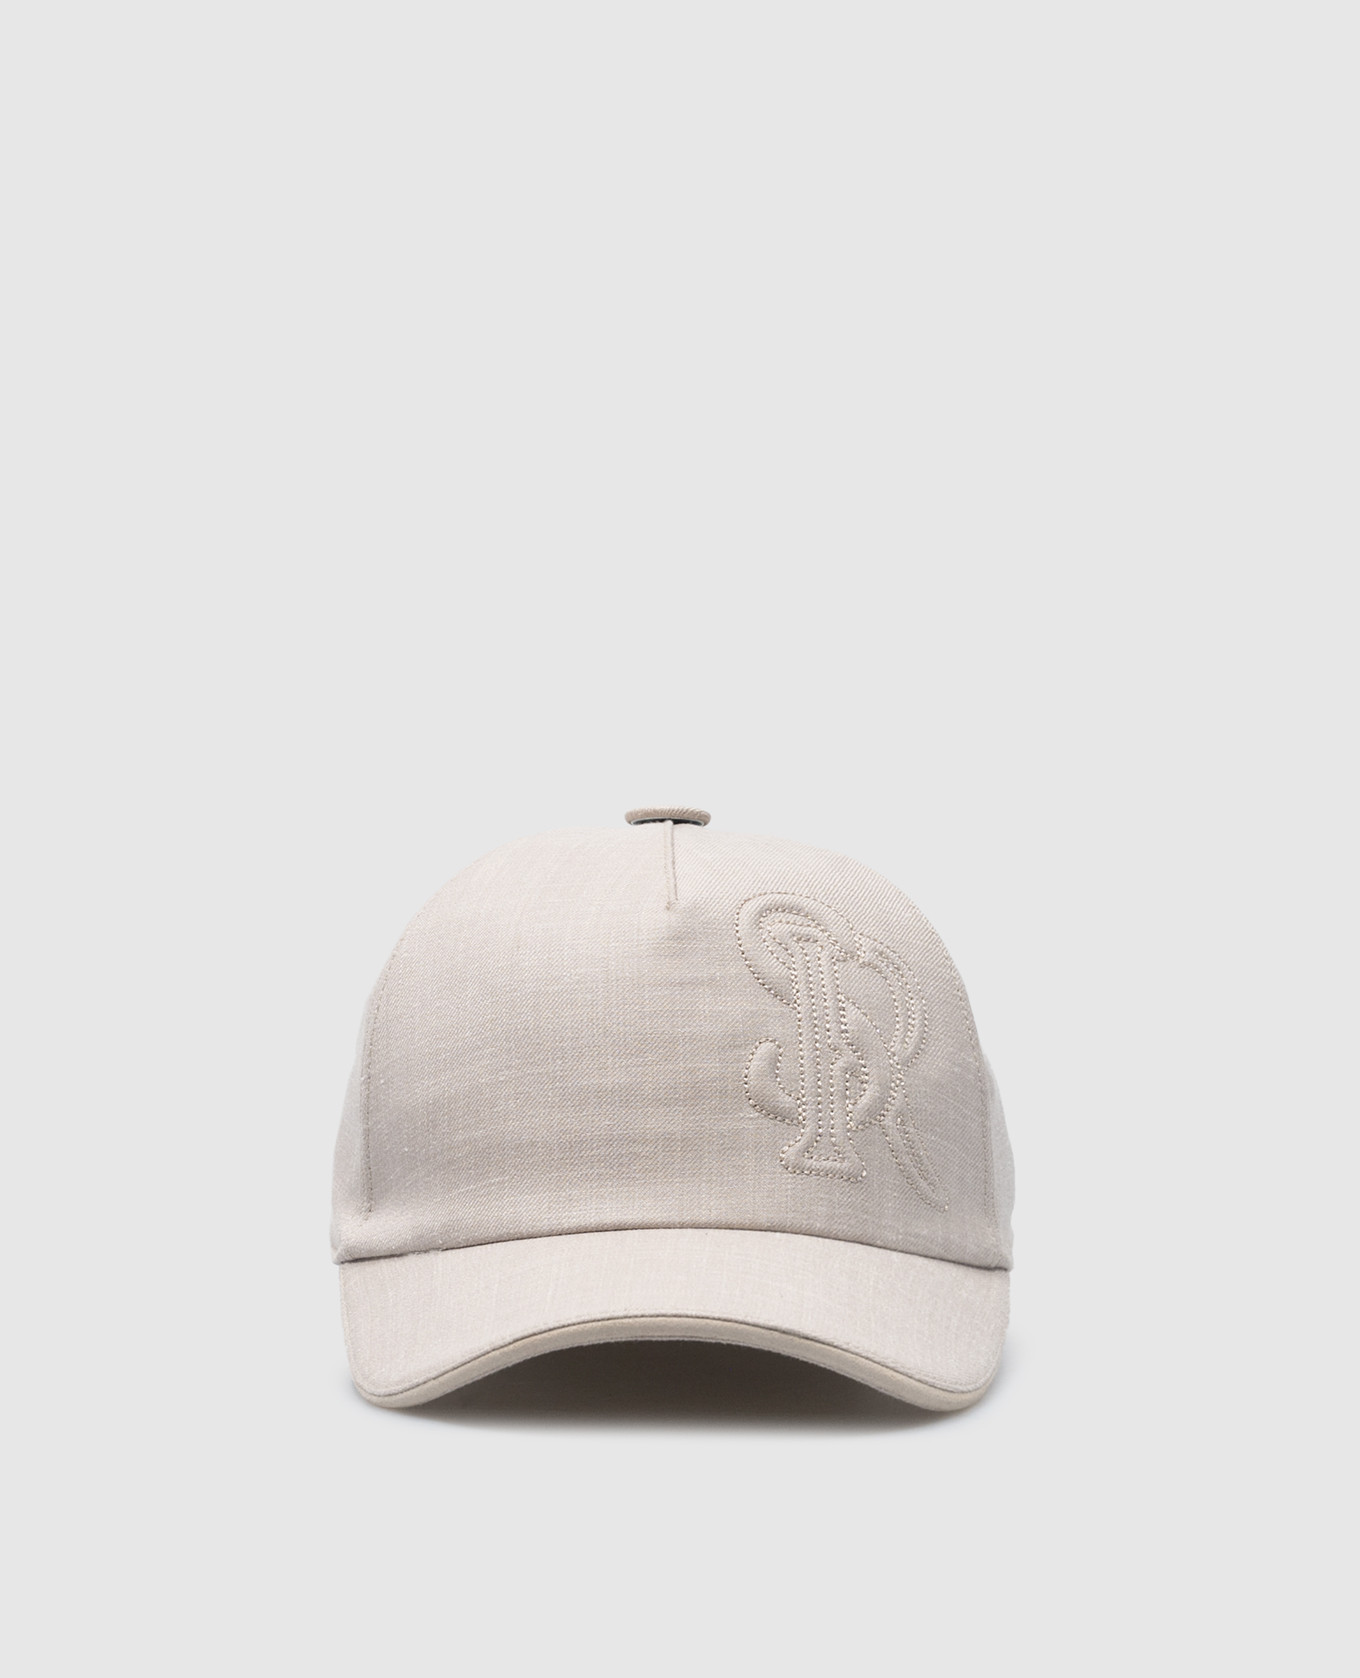 Beige wool, silk and linen cap with logo monogram embroidery